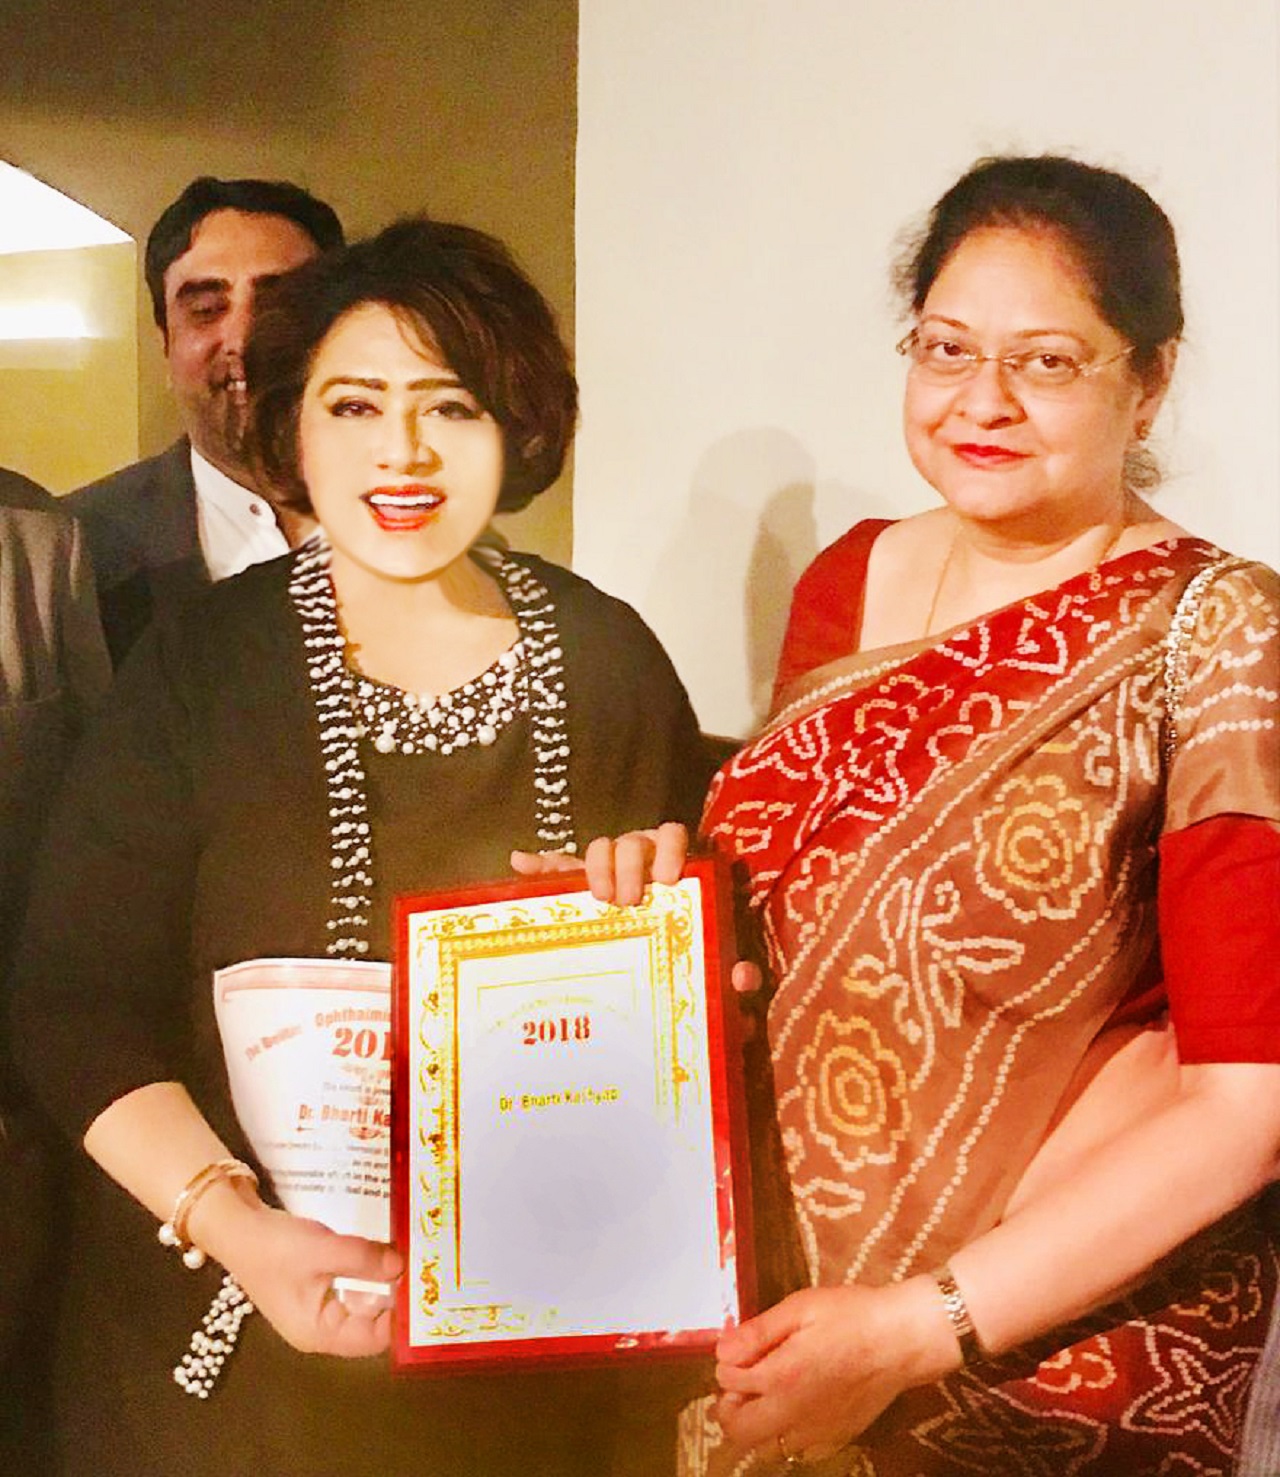 Dr. Bharti Kashyap:The British Excellence Award - 2018